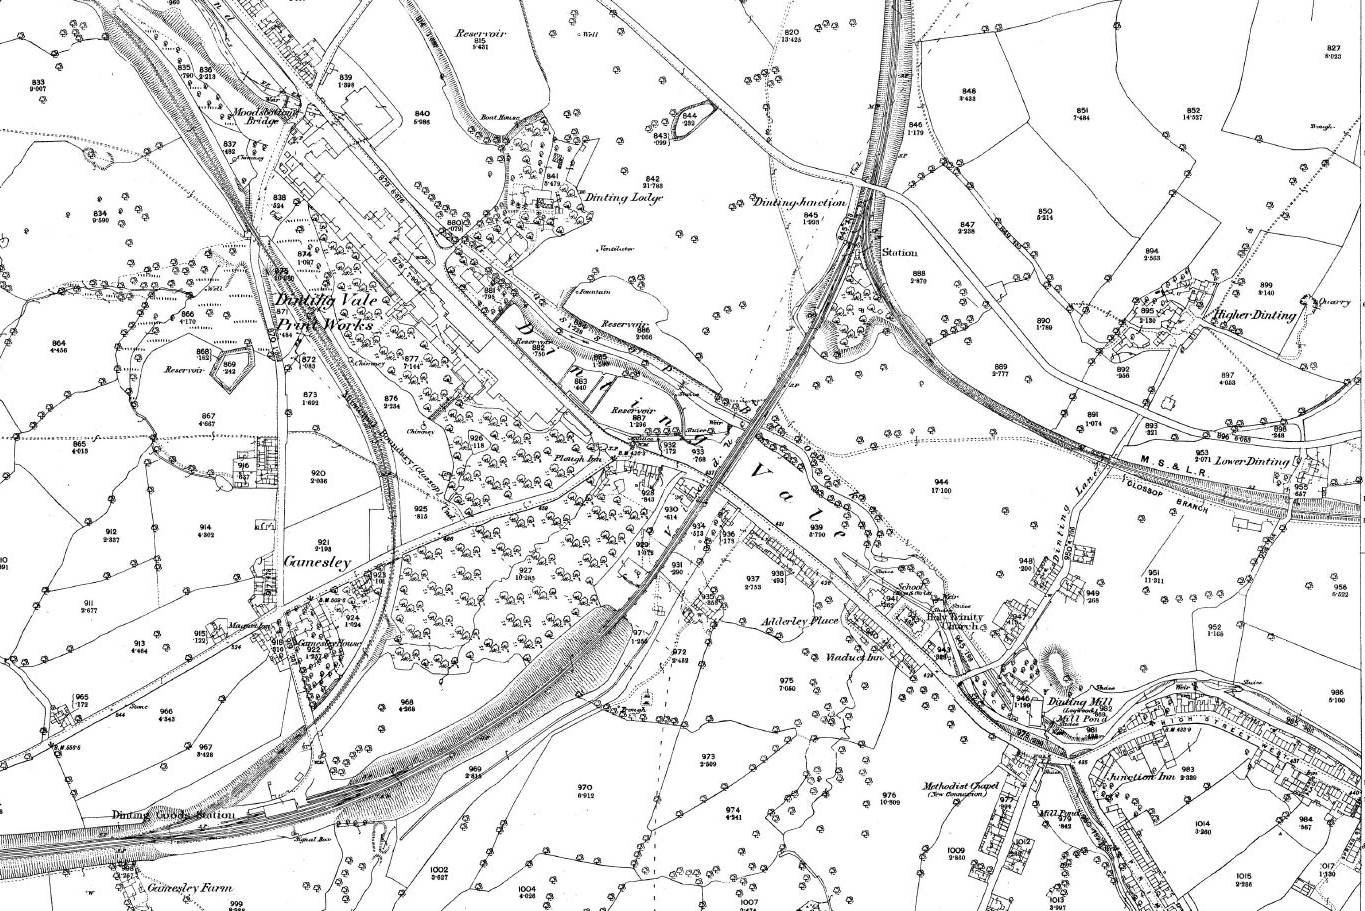 Extract from the 1879 OS Map